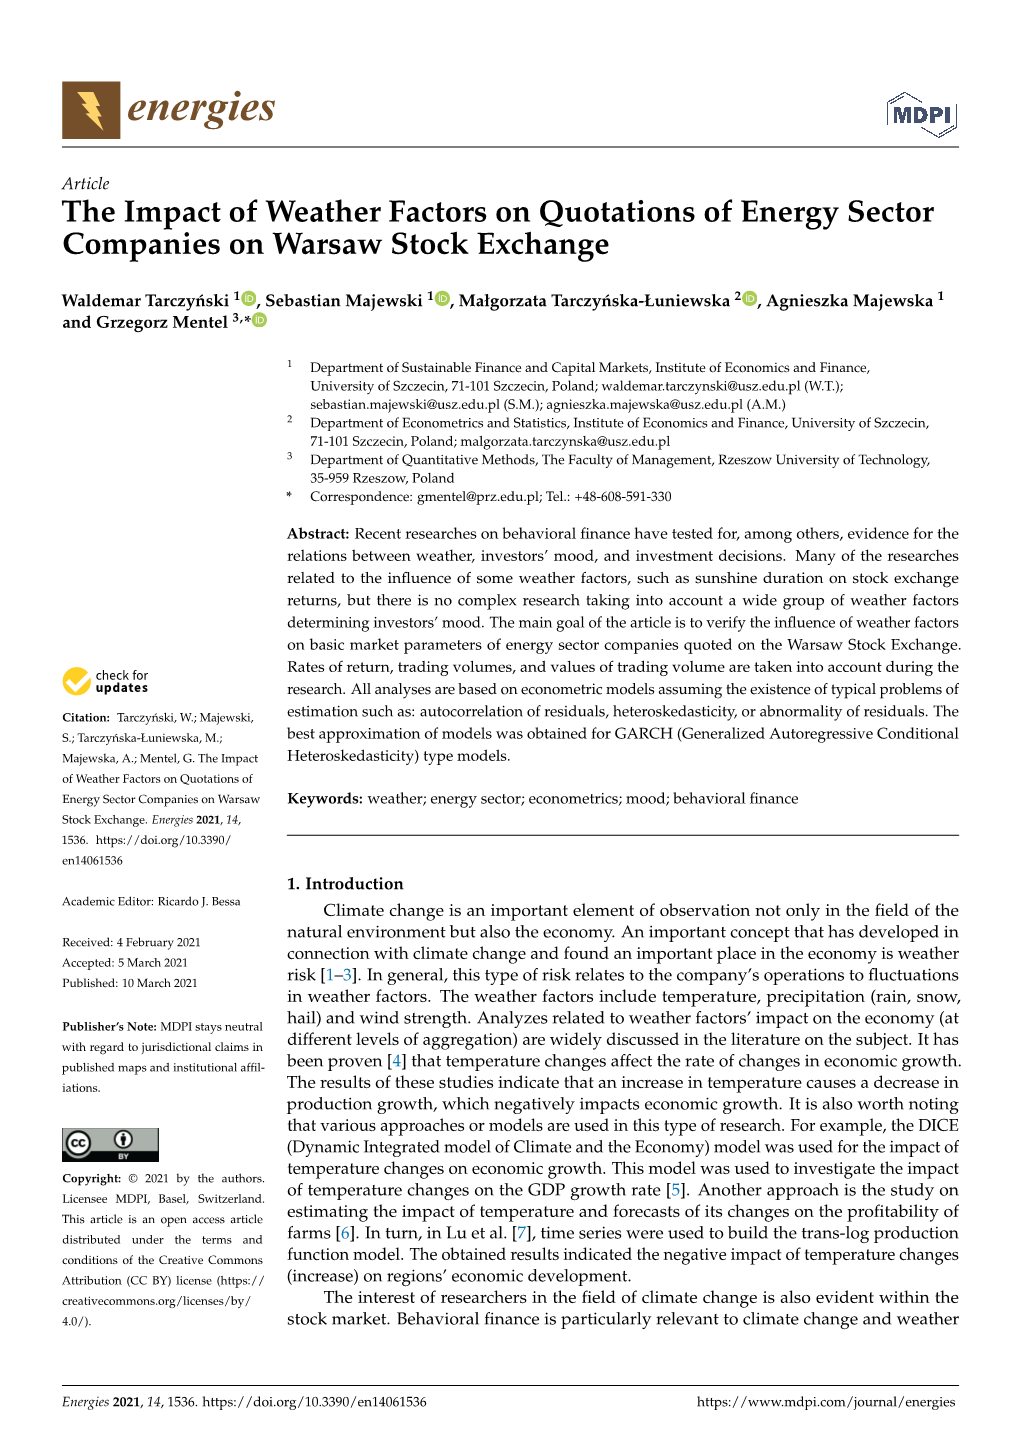 The Impact of Weather Factors on Quotations of Energy Sector Companies on Warsaw Stock Exchange